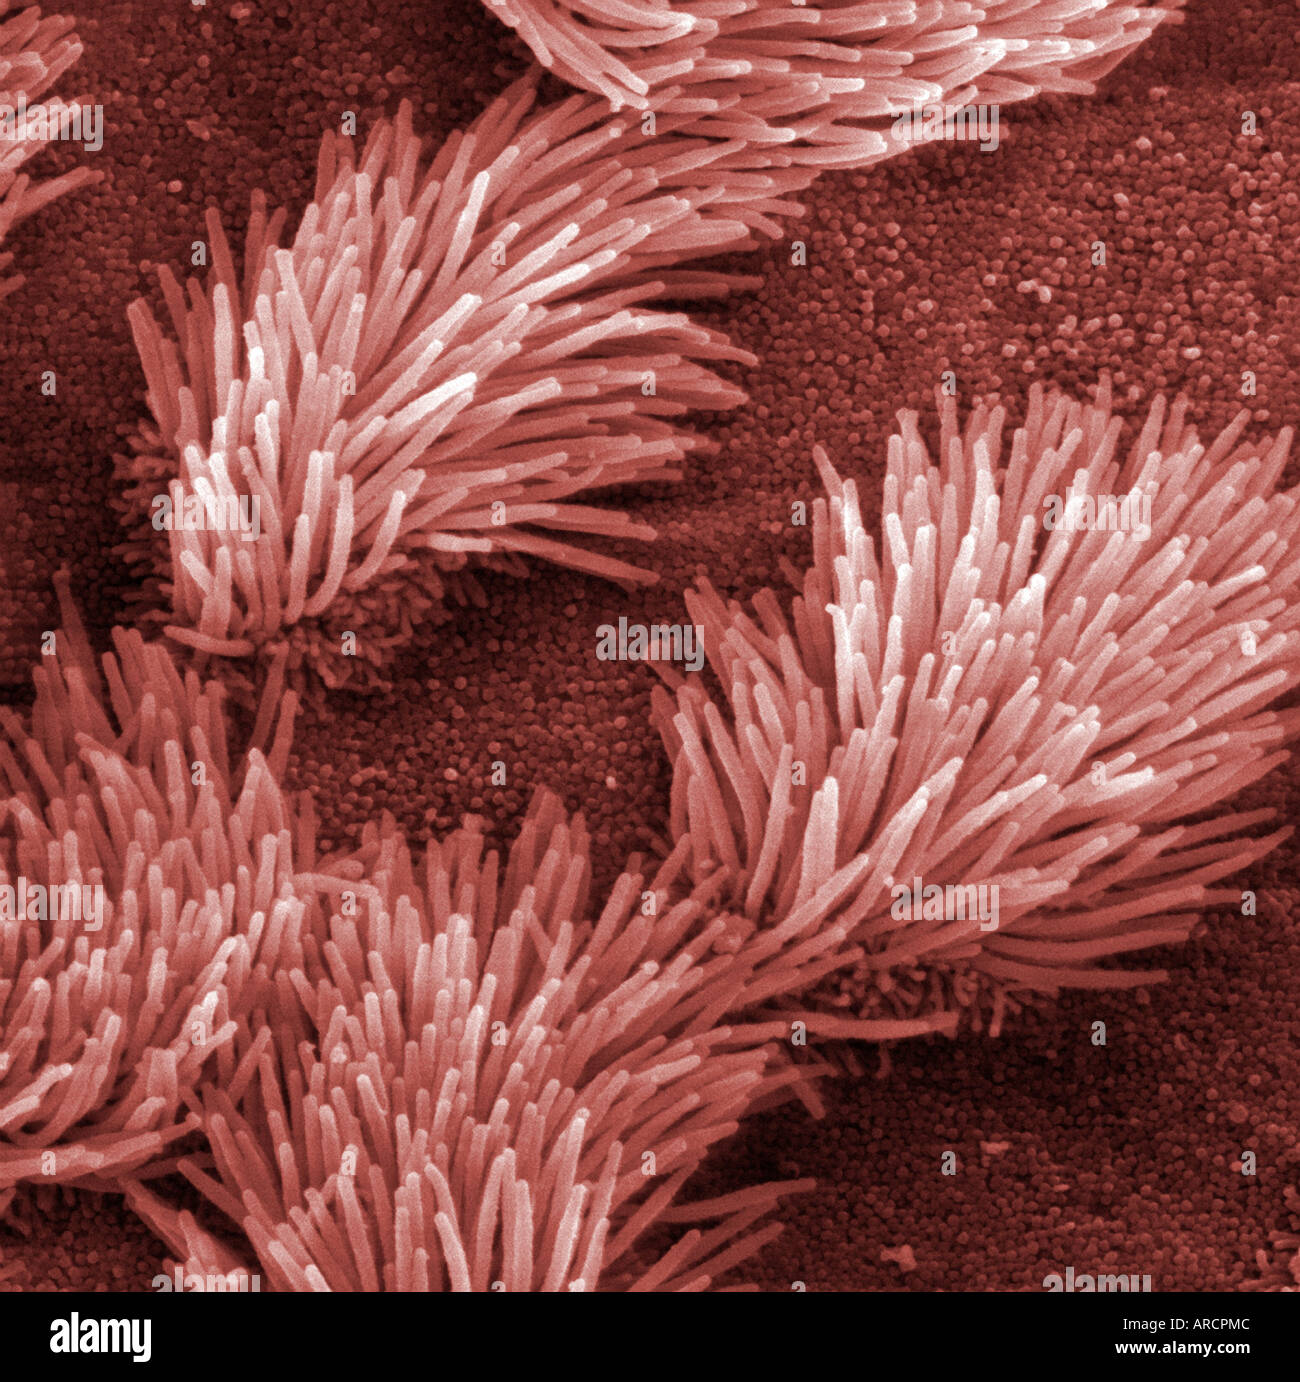 Scanning electron micrograph (SEM) of ciliated epithelium in the respiratory system. Stock Photo